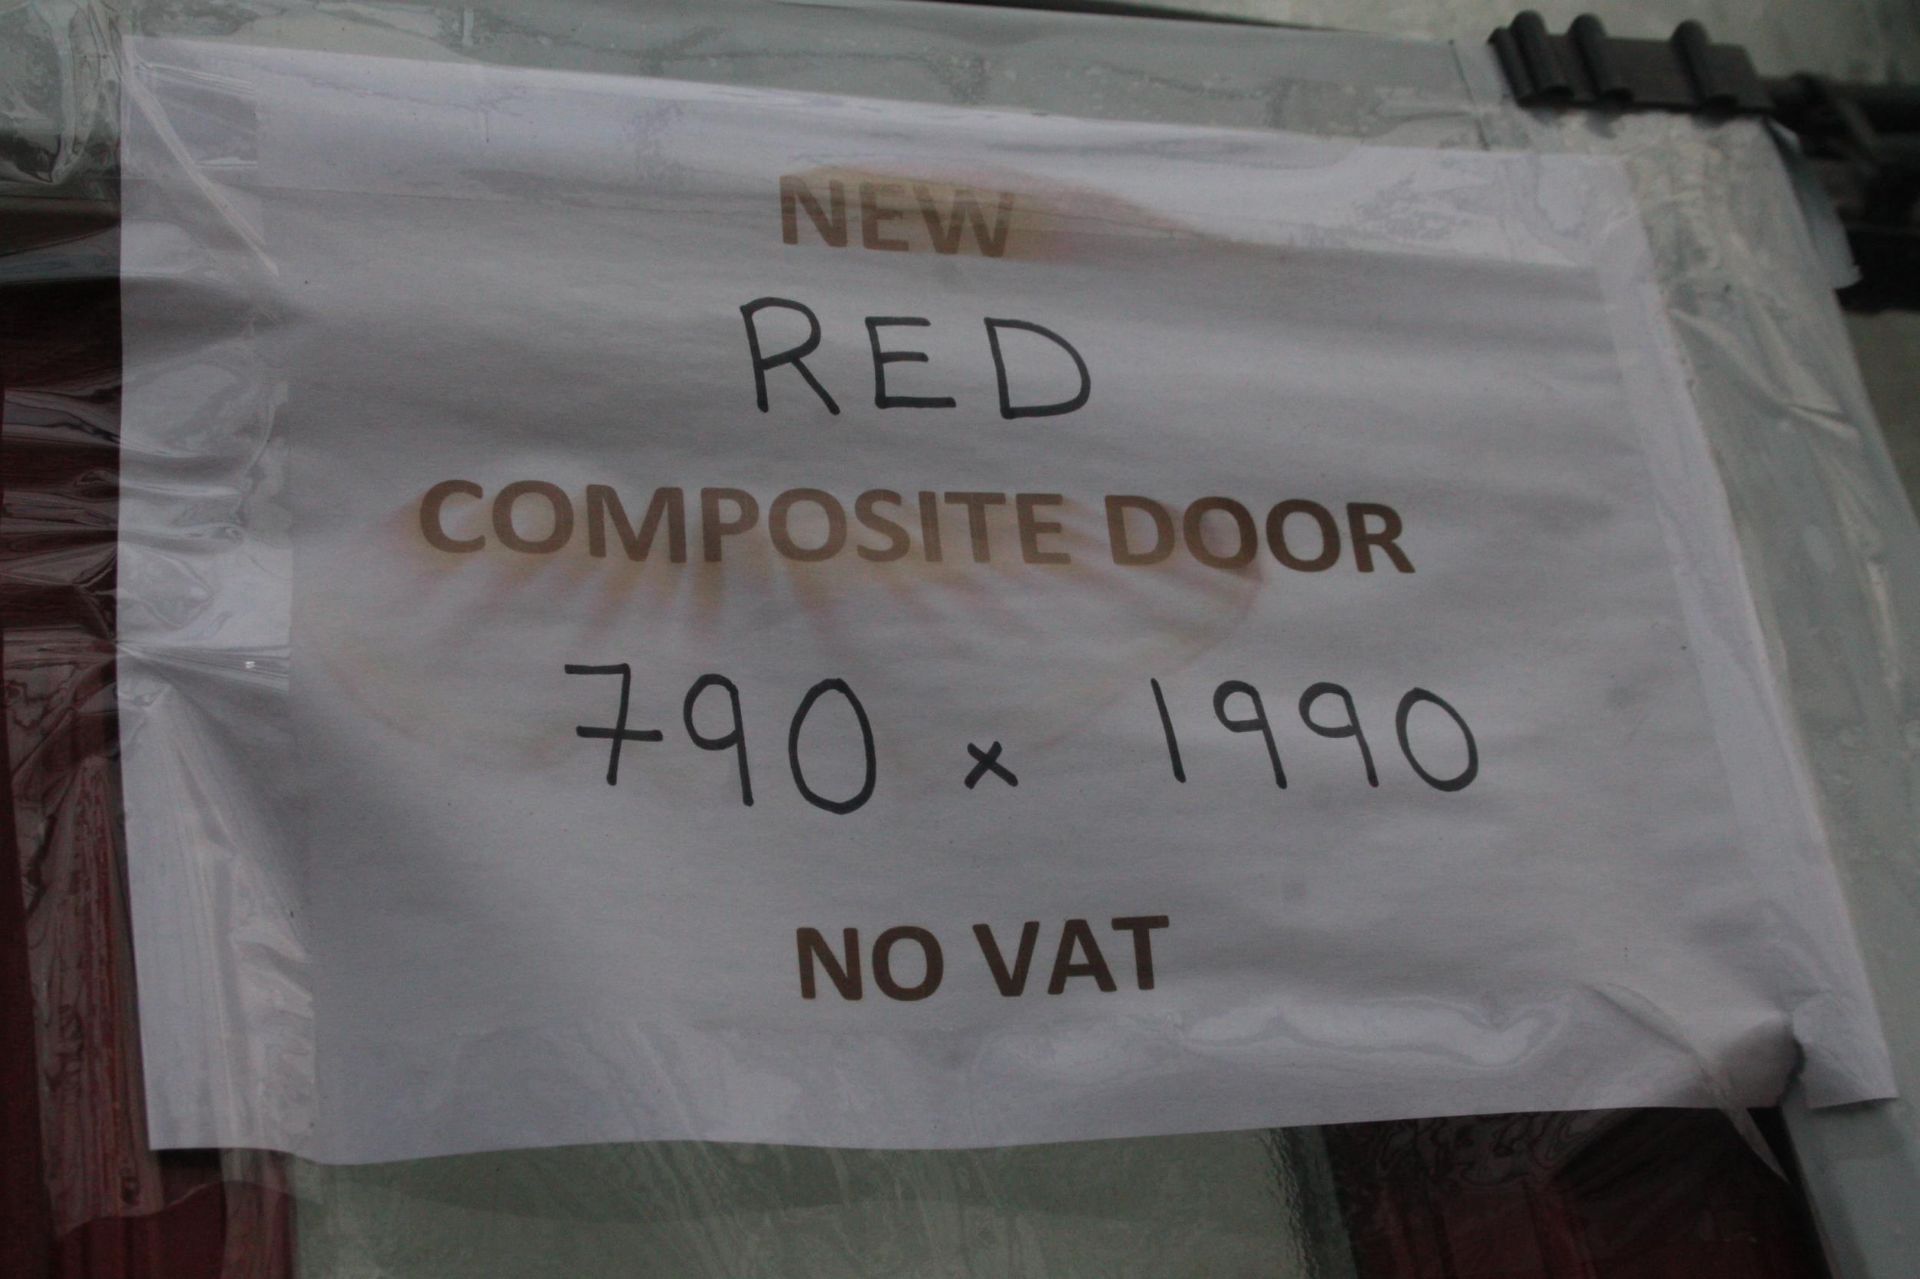 A NEW RED COMPOSITE DOOR AND FRAME 790MM X 1990MM LOCK AND KEYS IN LETTER BOX NO VAT - Bild 2 aus 2